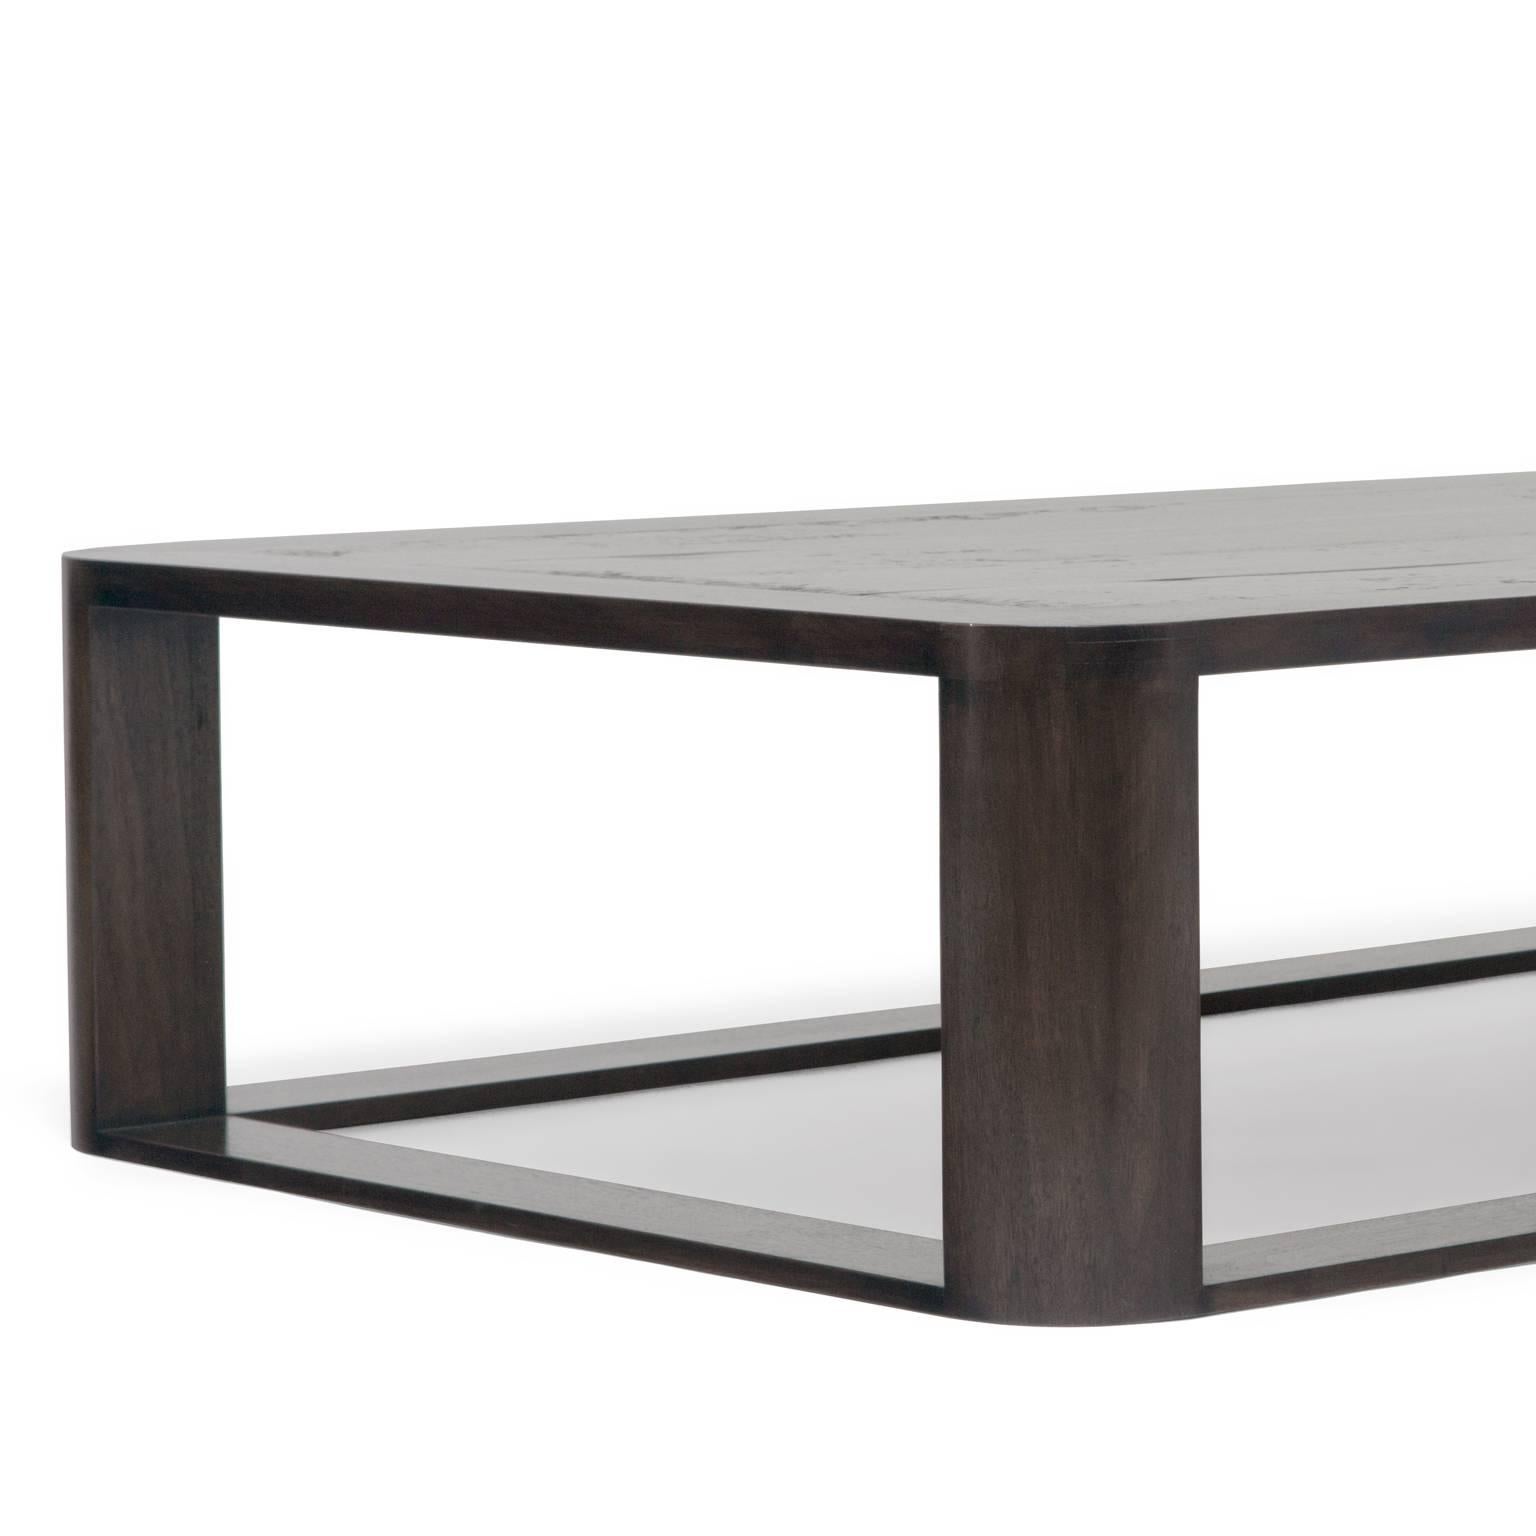 Other Quarter Radius Coffee Table For Sale